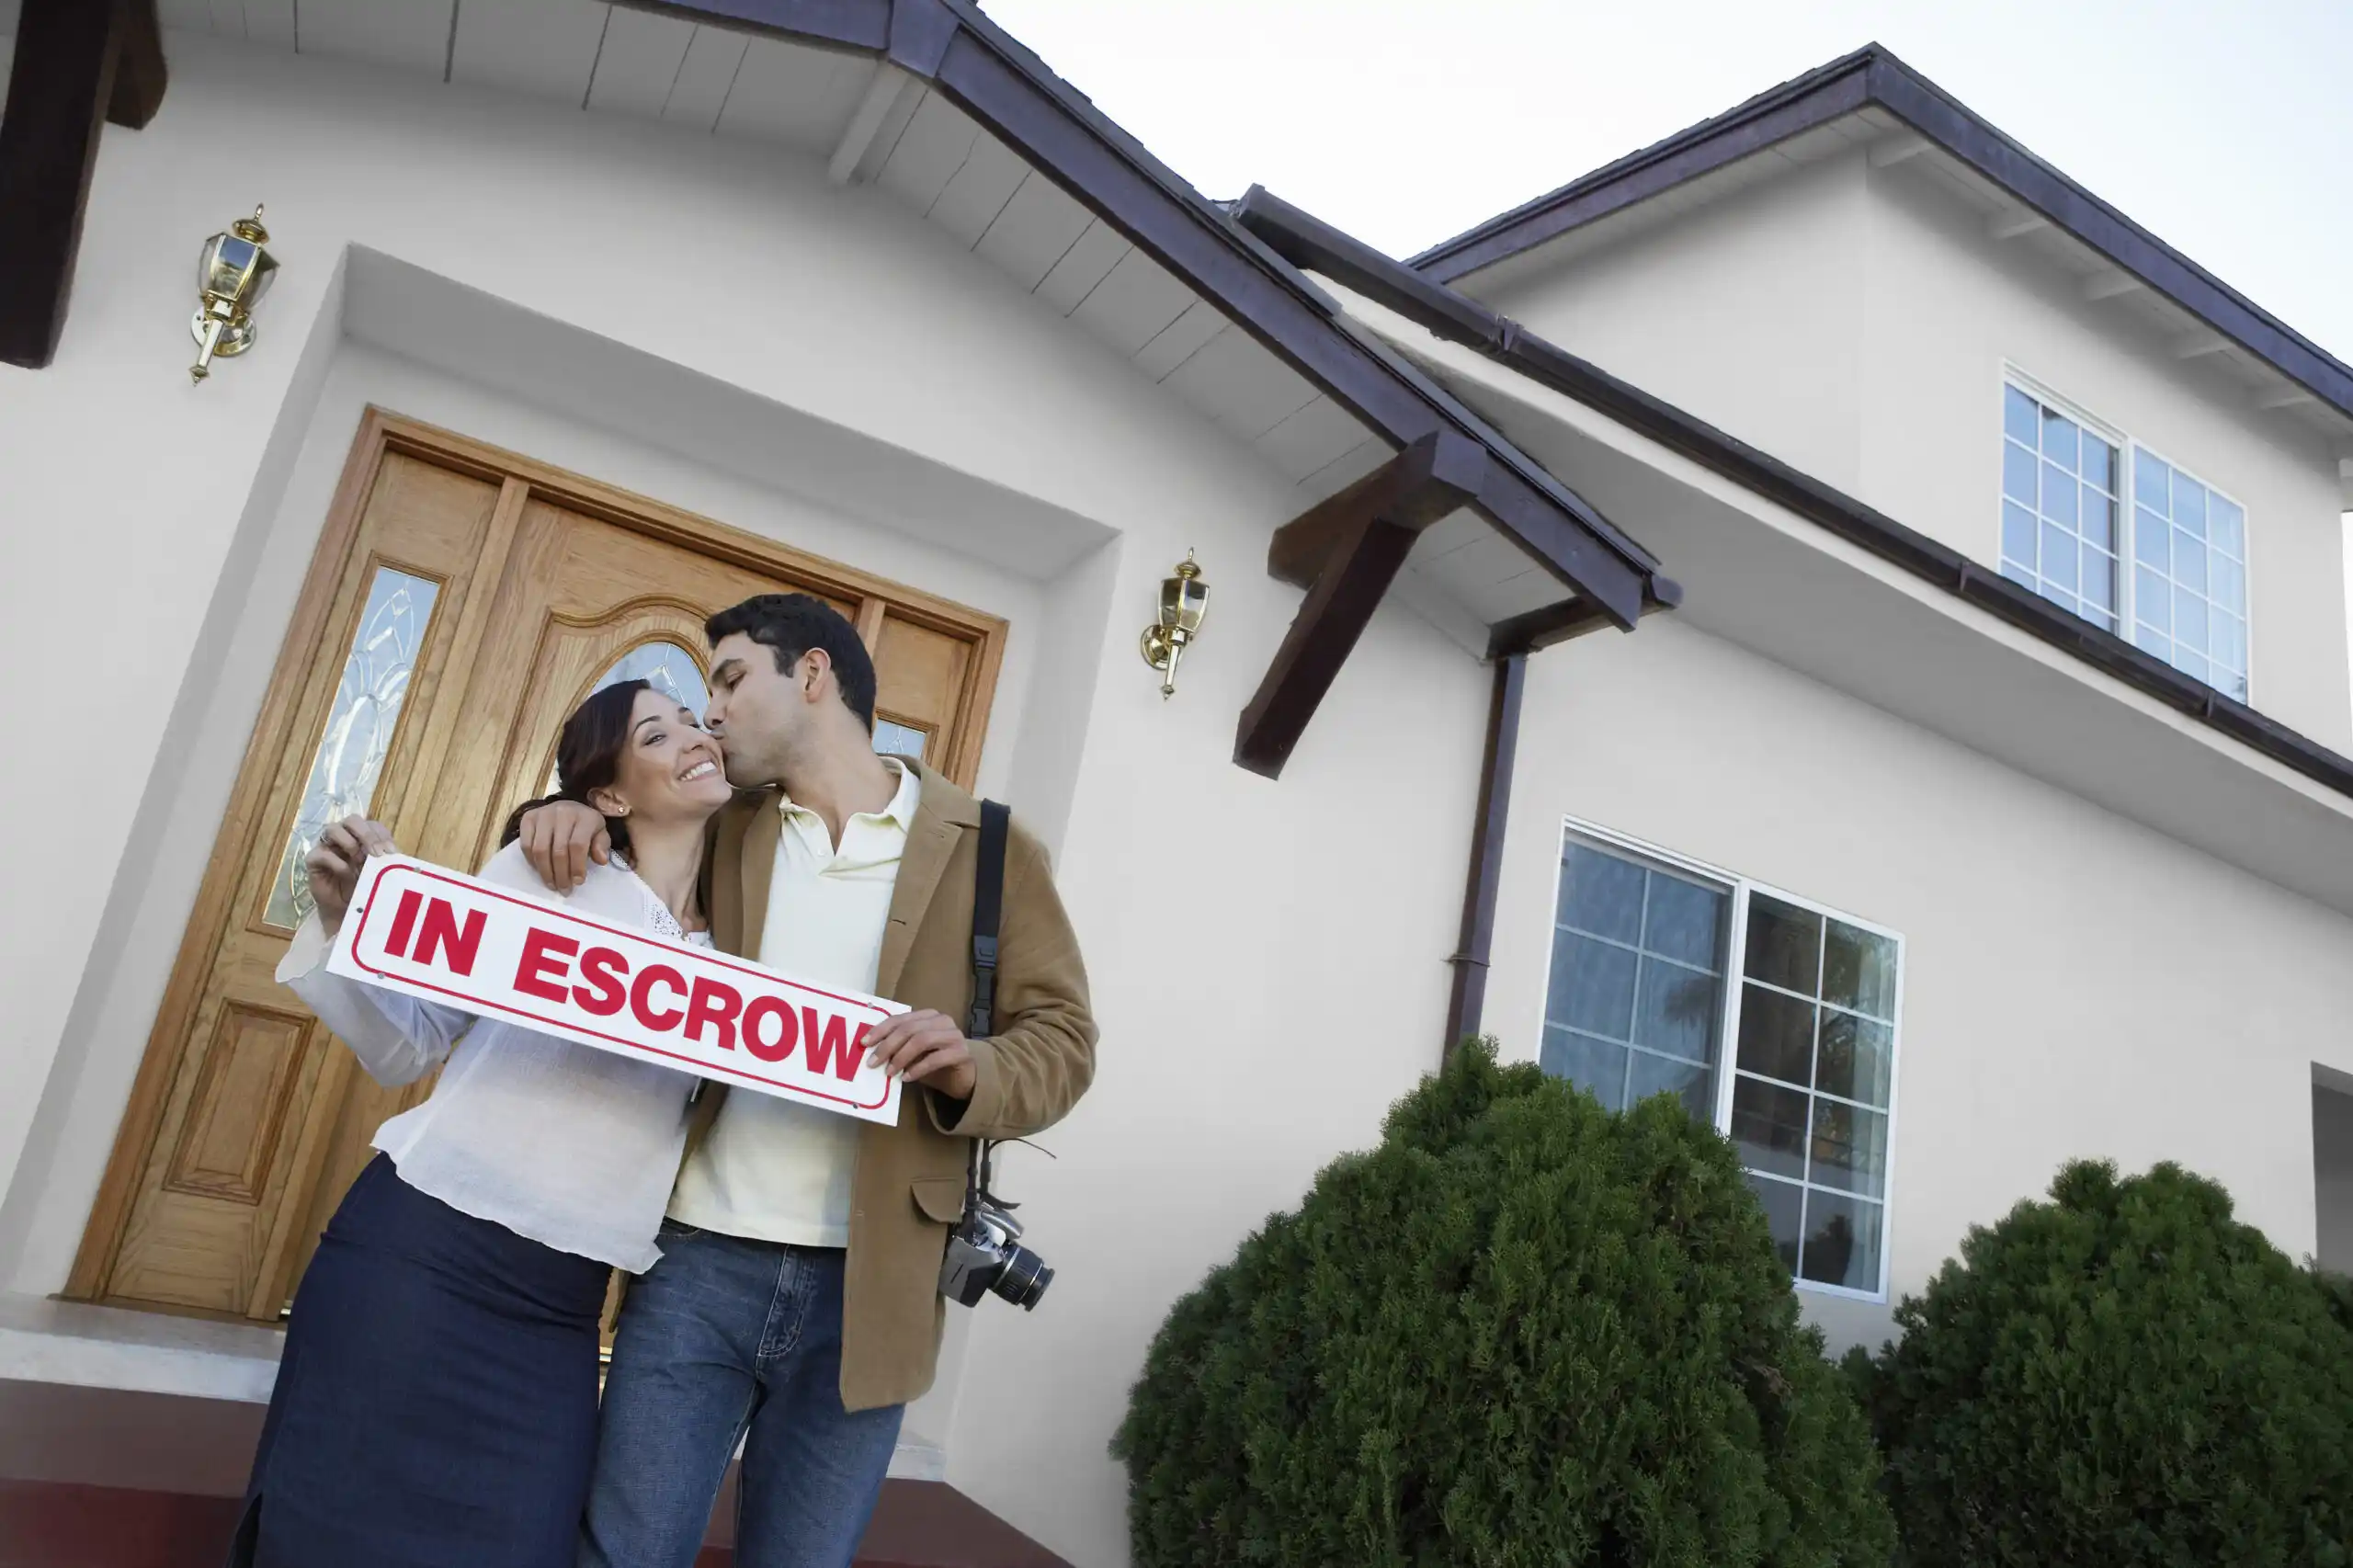 The Dos and Don’ts of Escrow for New Homebuyers